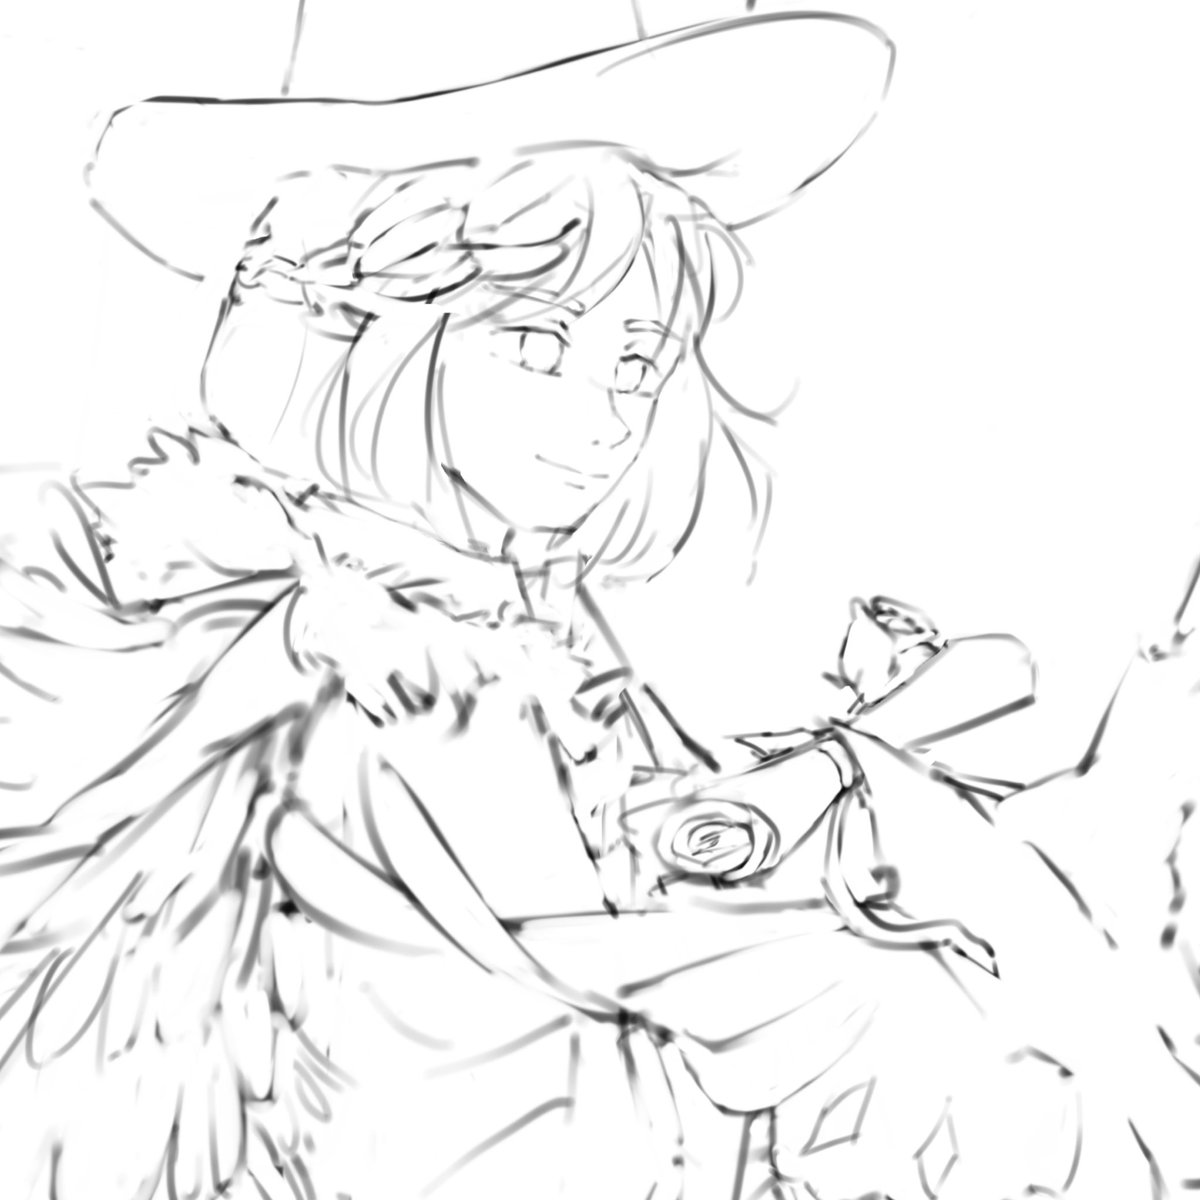 part of the lineart for next post hehhe 